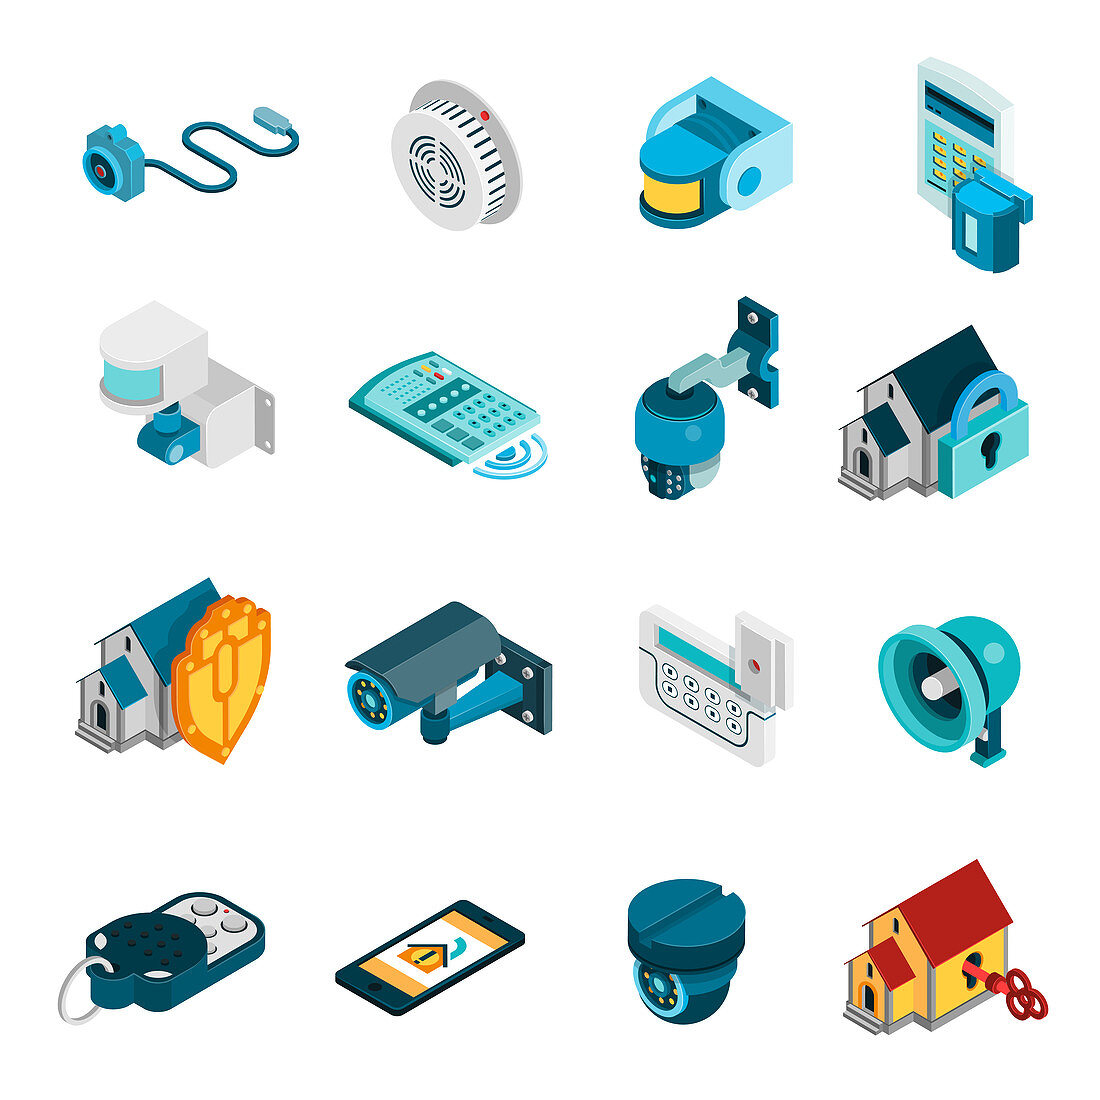 Security system icons, illustration